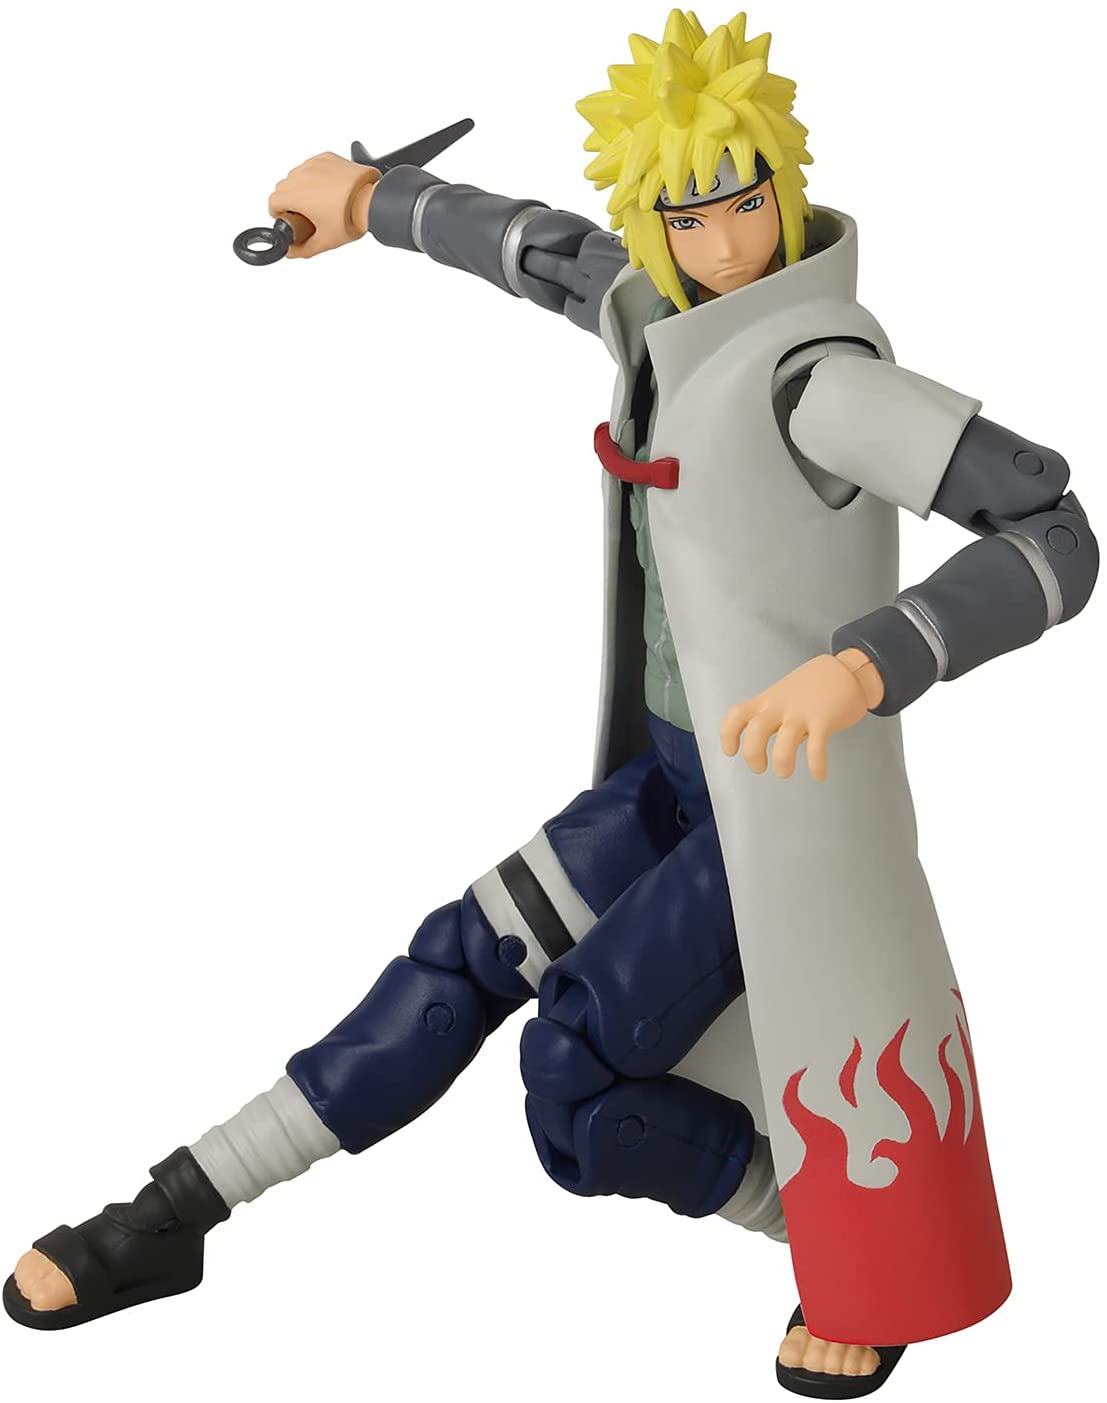 Anime Heroes Official Naruto Shippuden Action Figure - Namikaze Minato - Poseable Action Figure with Swappable Hands and Accessories 36905